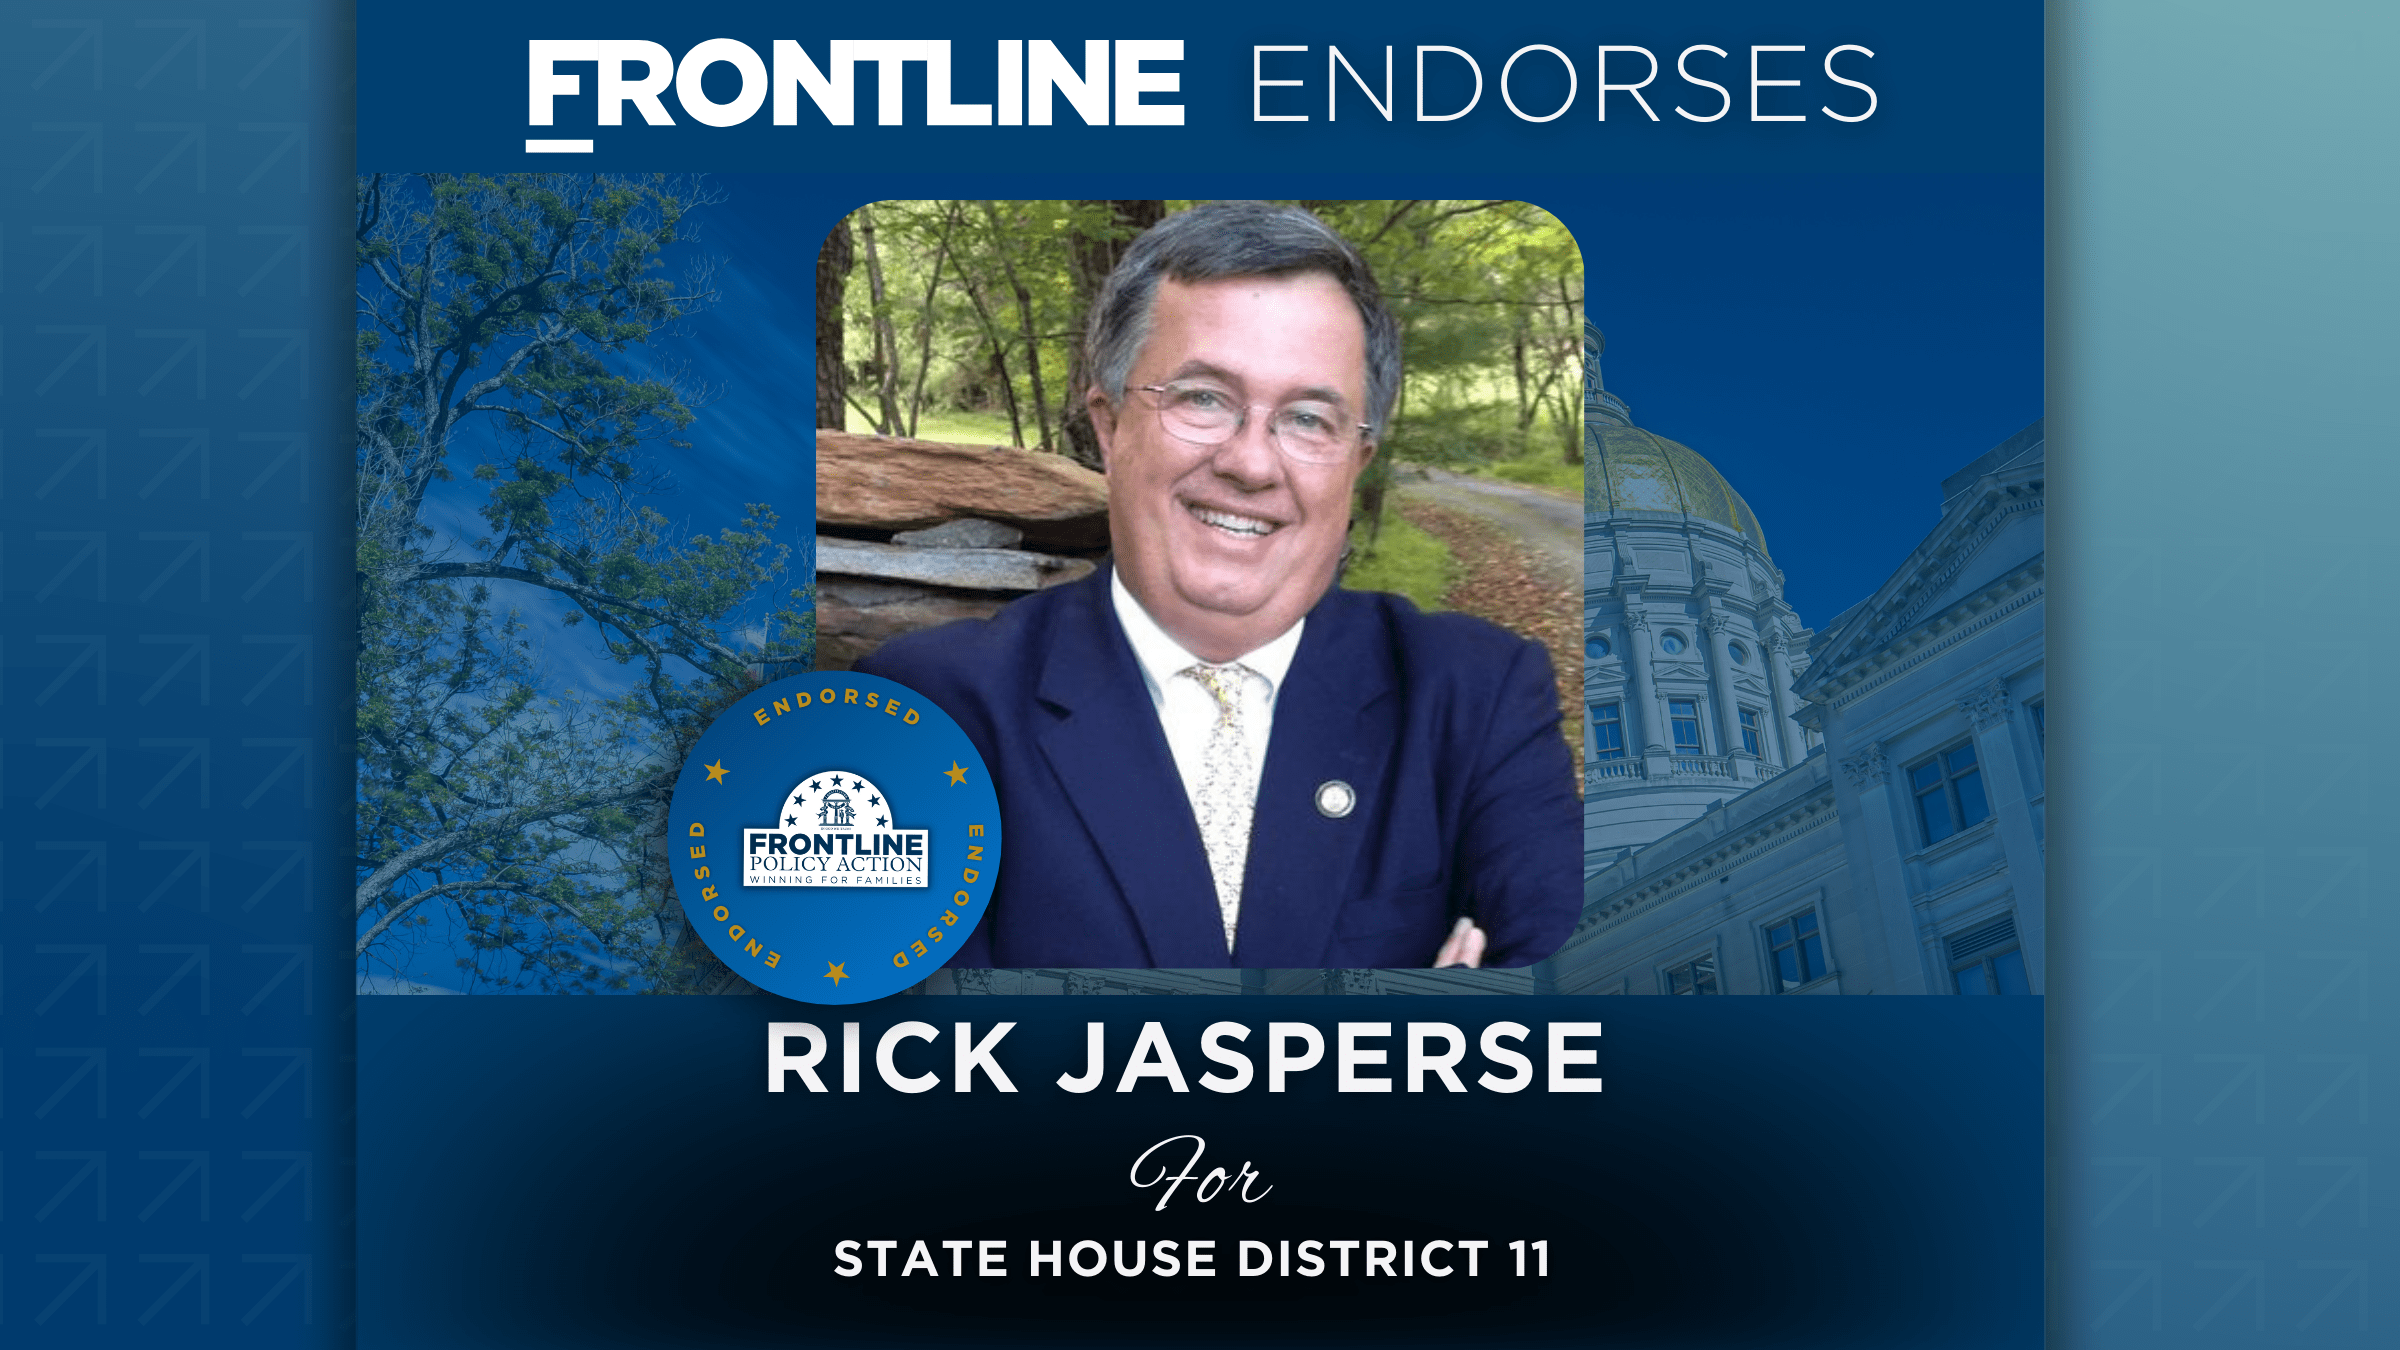 BREAKING: Frontline Endorses Rick Jasperse for State House District 11